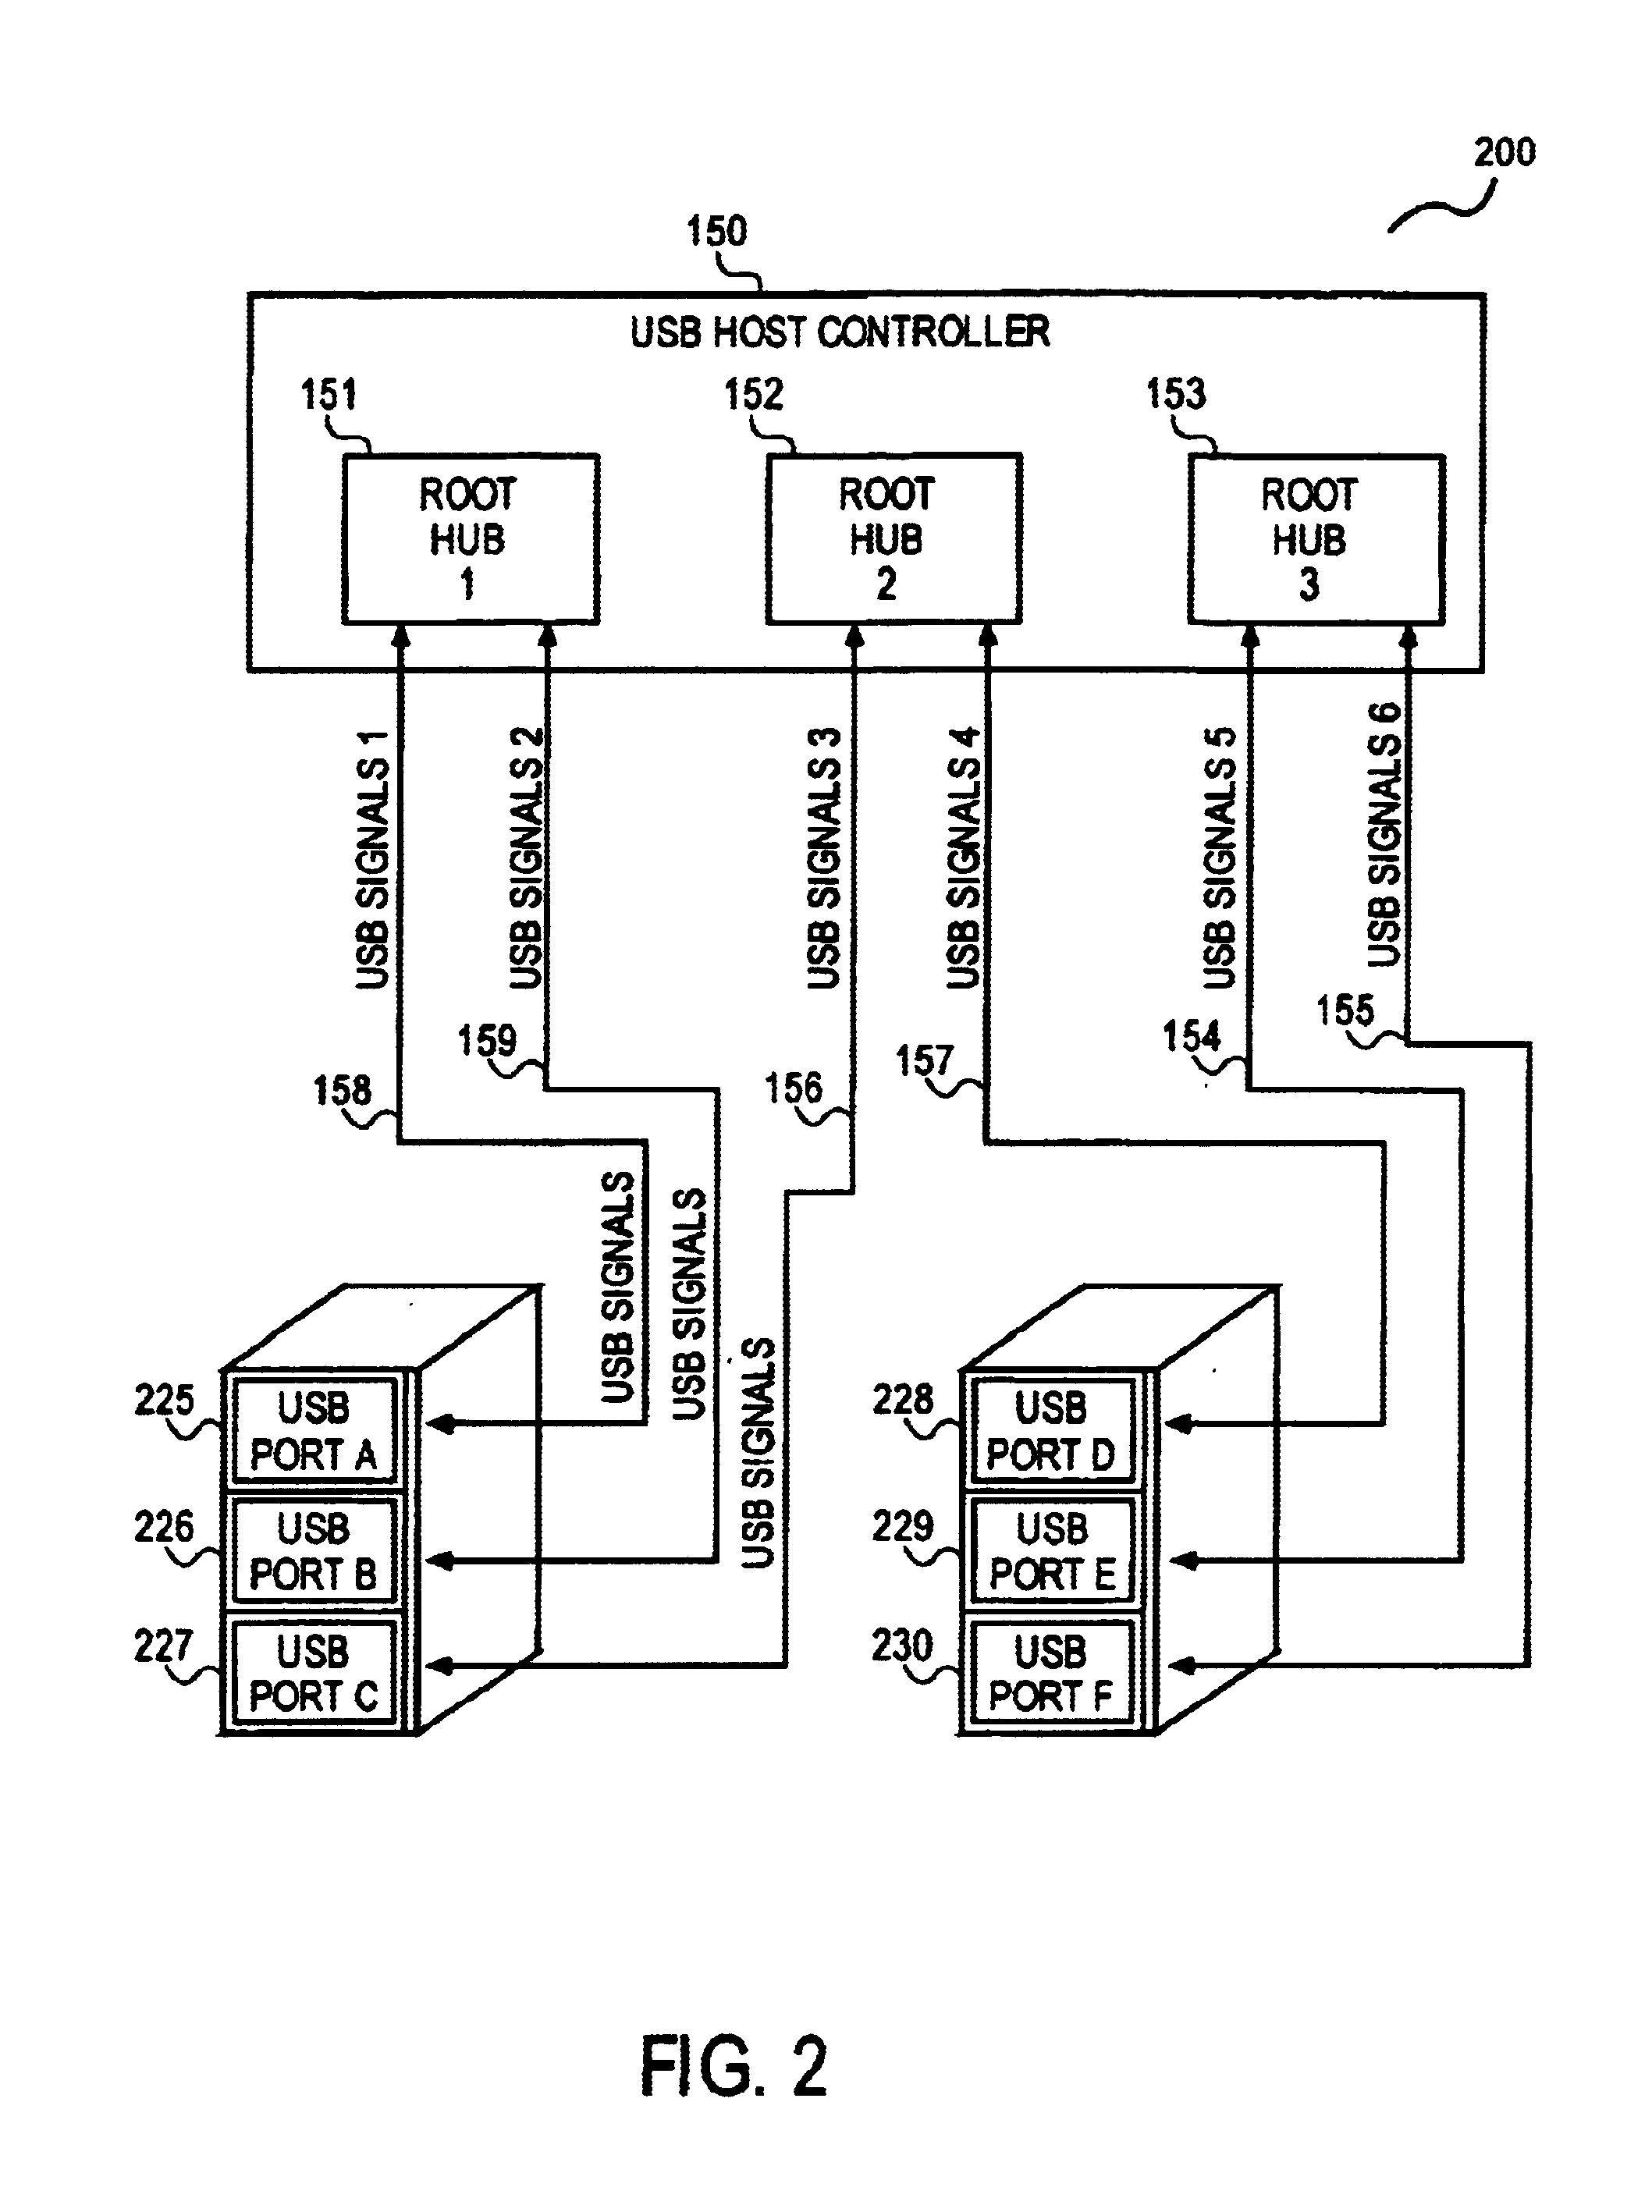 Method and apparatus to maximize bandwidth availability to USB devices